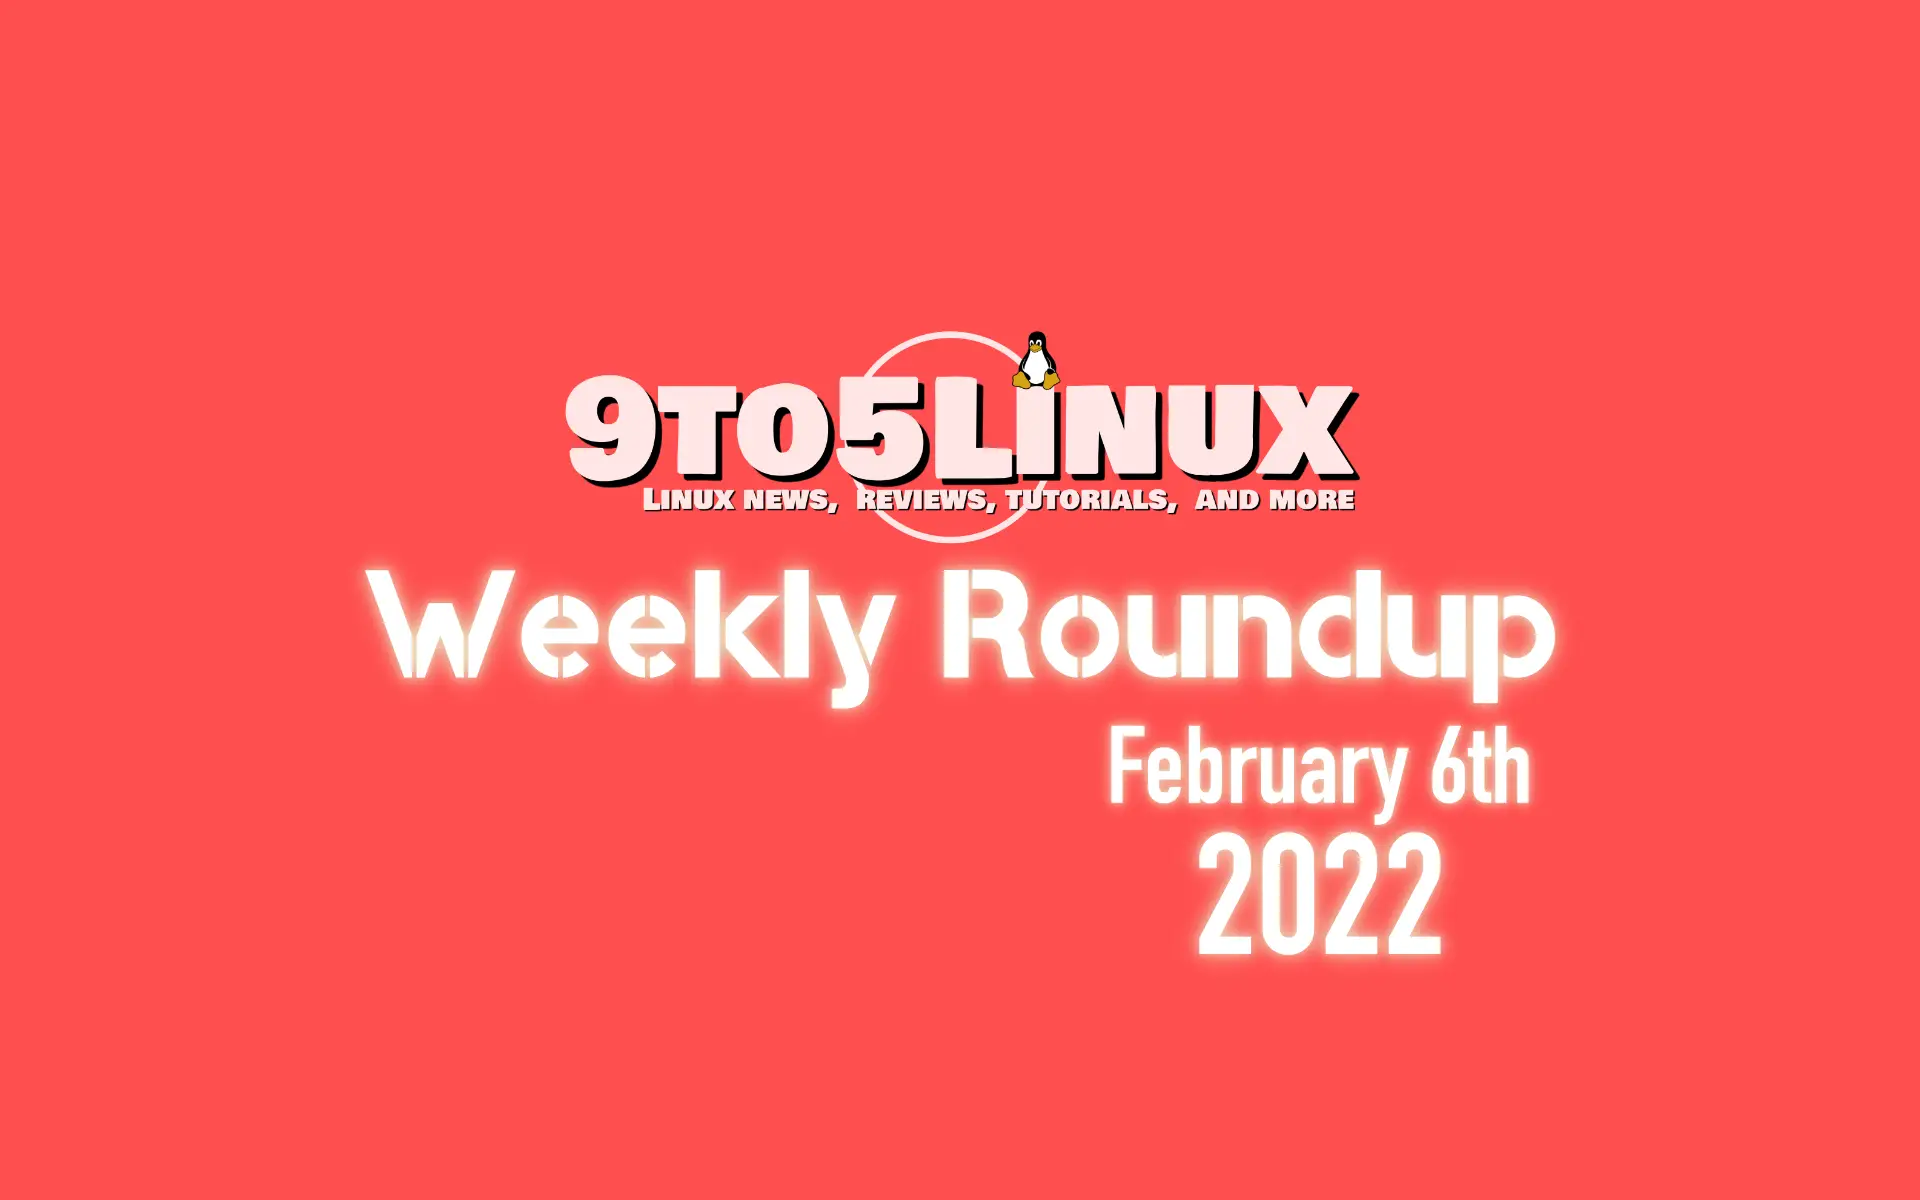 9to5Linux Weekly Roundup: February 6th, 2022